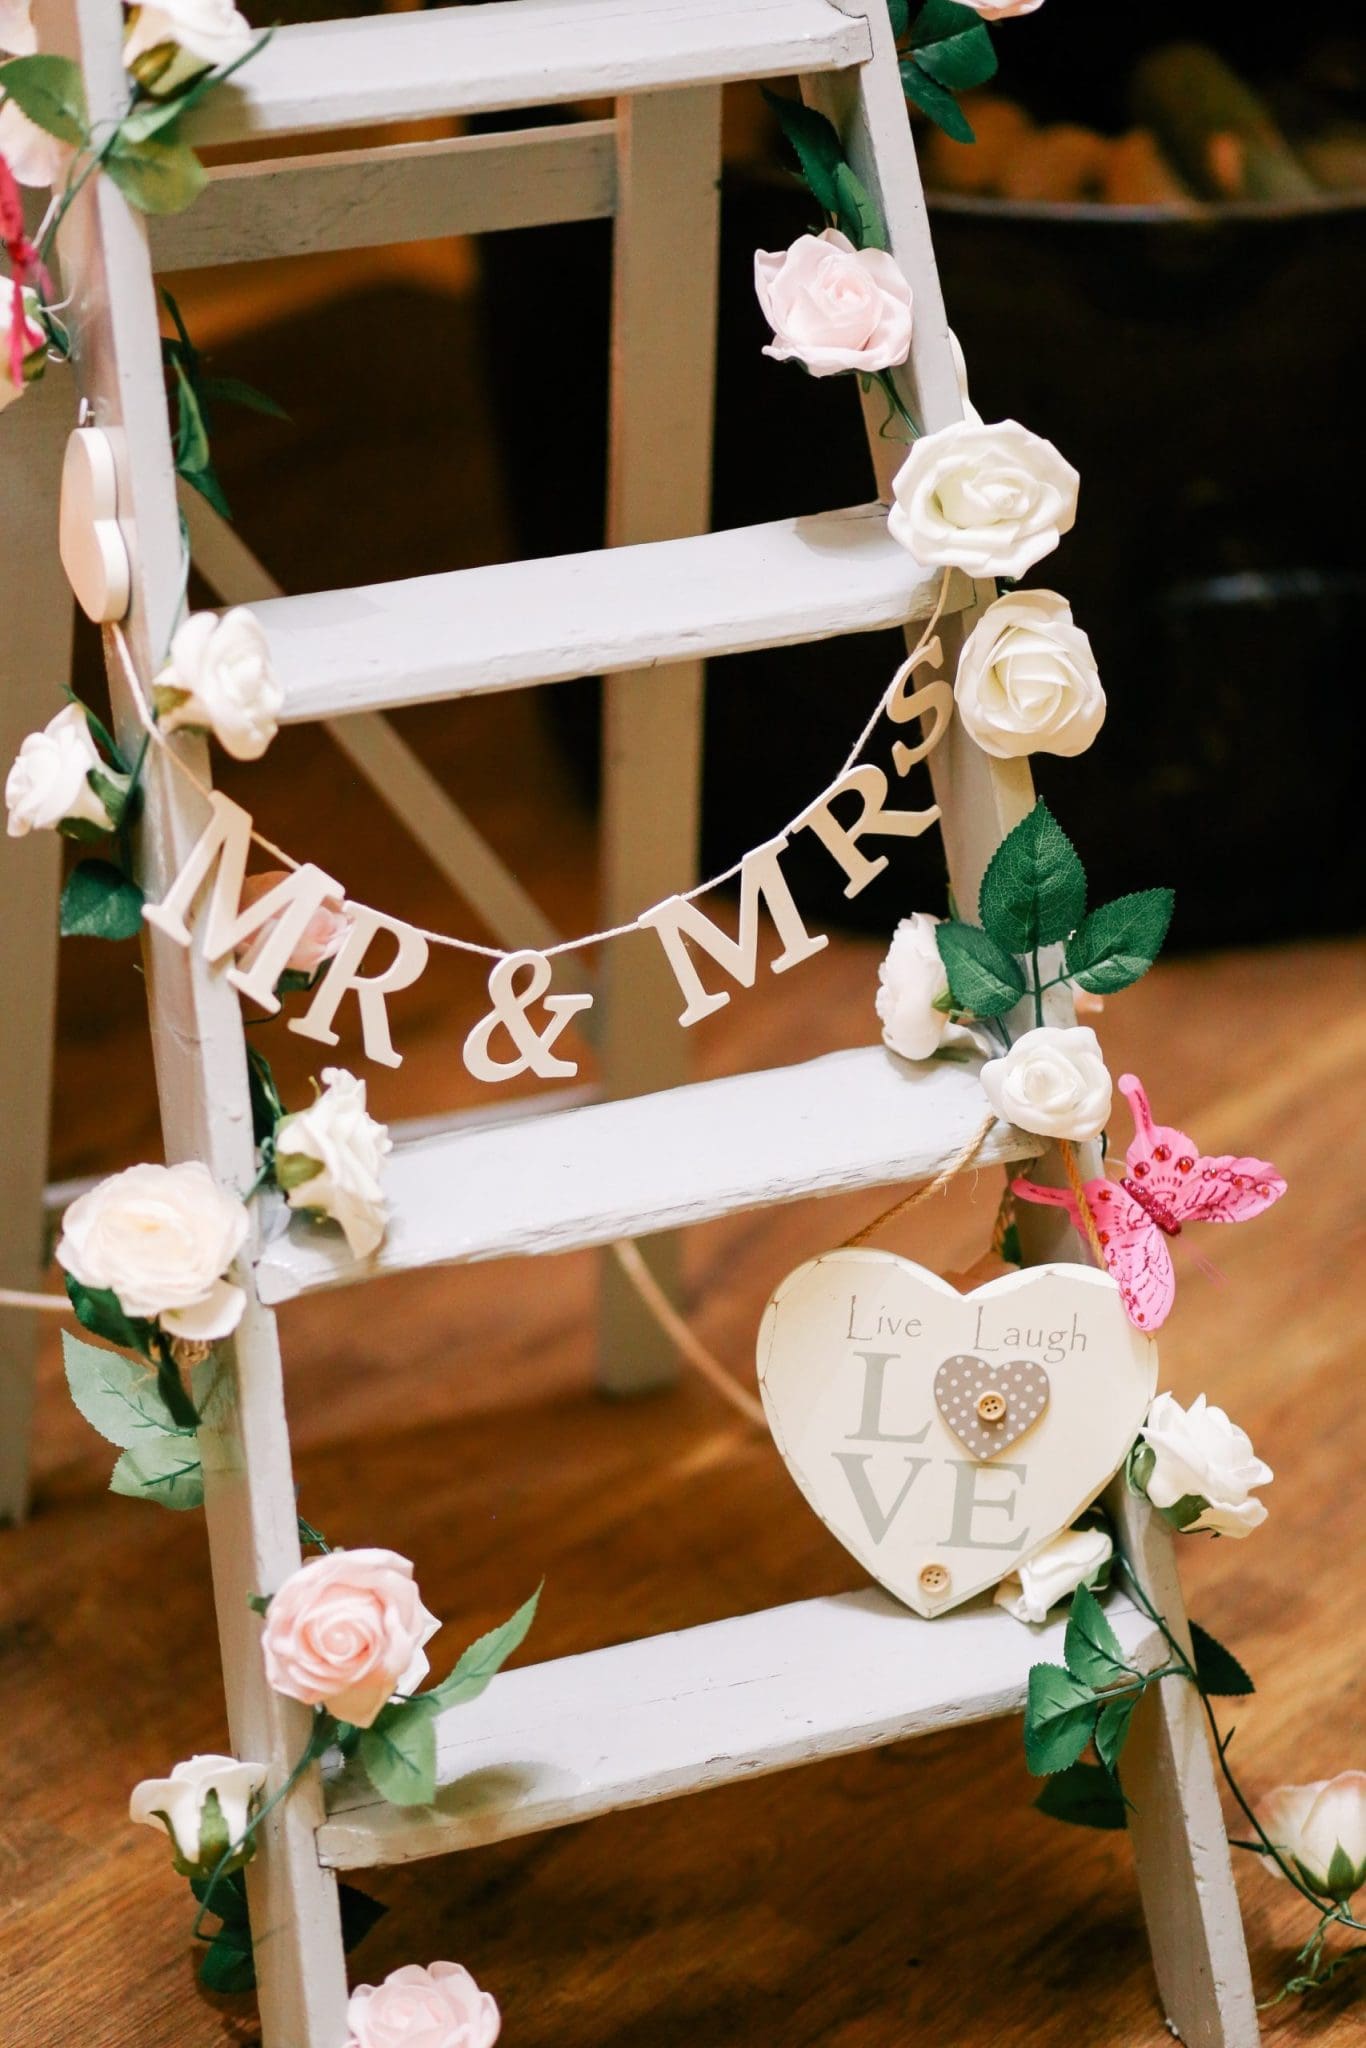 Wedding decoration ladders with Mr & Mrs